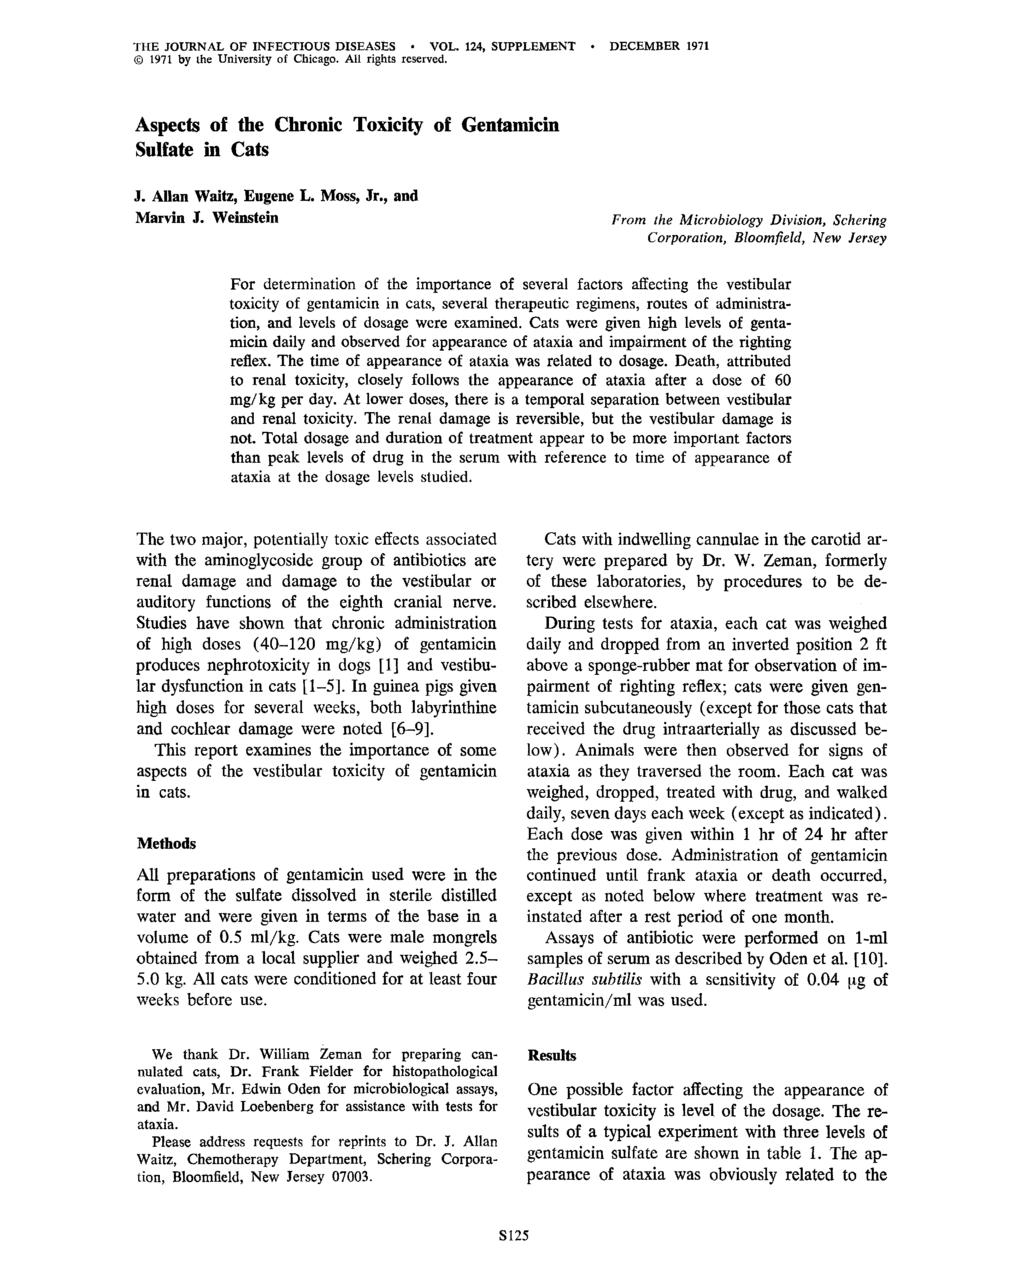 THE JOURNAL OF INFECTIOUS DISEASES VOL. 124, SUPPLEMENT DECEMBER 1971 1971 by the University of Chicago. All rights reserved. Aspects of the Chronic Toxicity of Gentamicin Sulfate in Cats J.